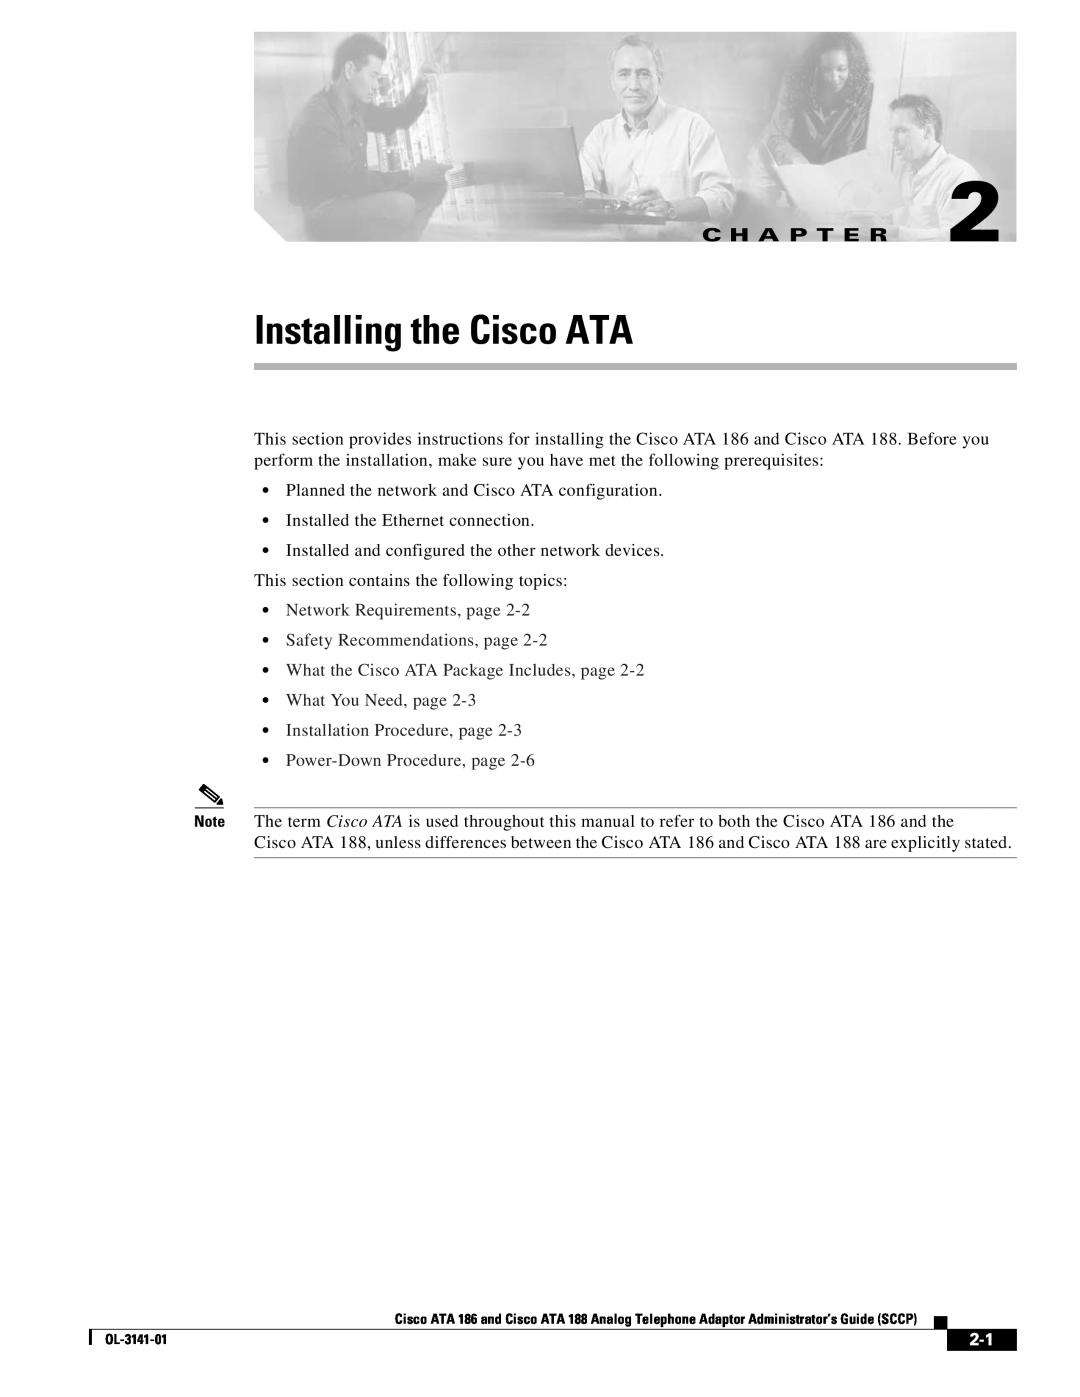 Cisco Systems ATA 188 Installing the Cisco ATA, C H A P T E R, Network Requirements, page Safety Recommendations, page 